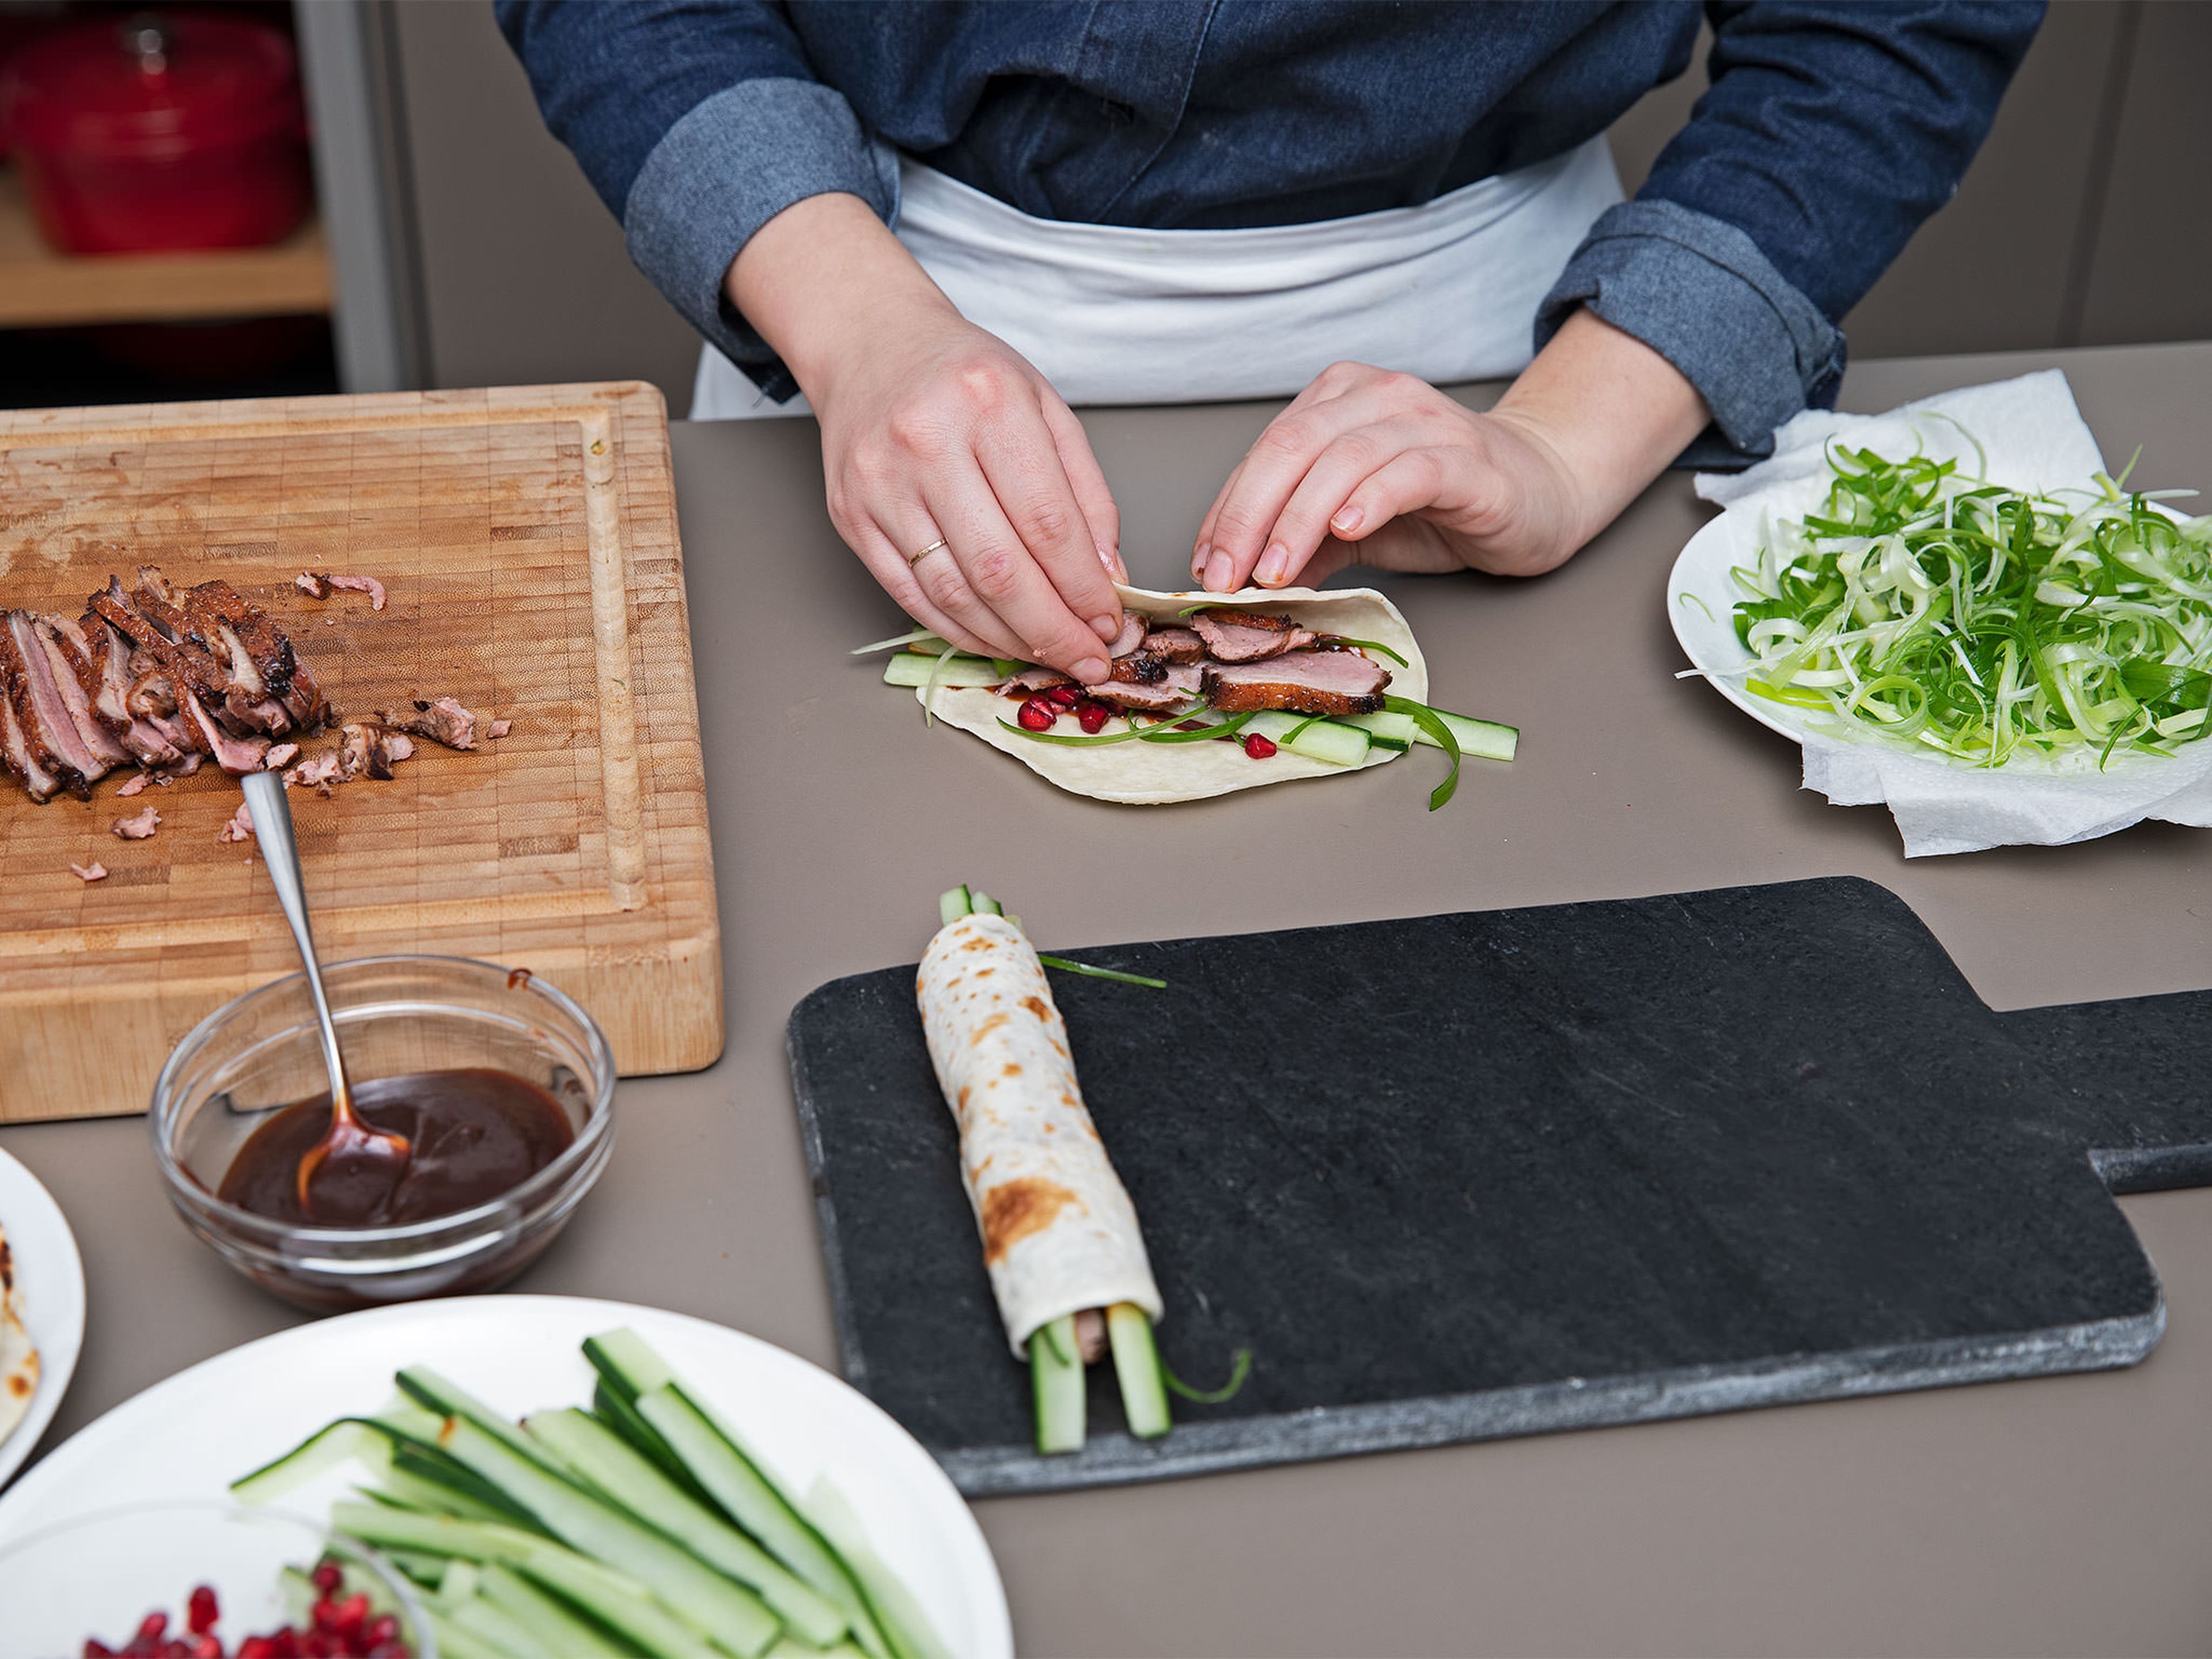 Spread pancakes with hoisin sauce, top with cucumber, scallions, pomegranate seeds, and duck slices, then wrap them one after another. Enjoy!